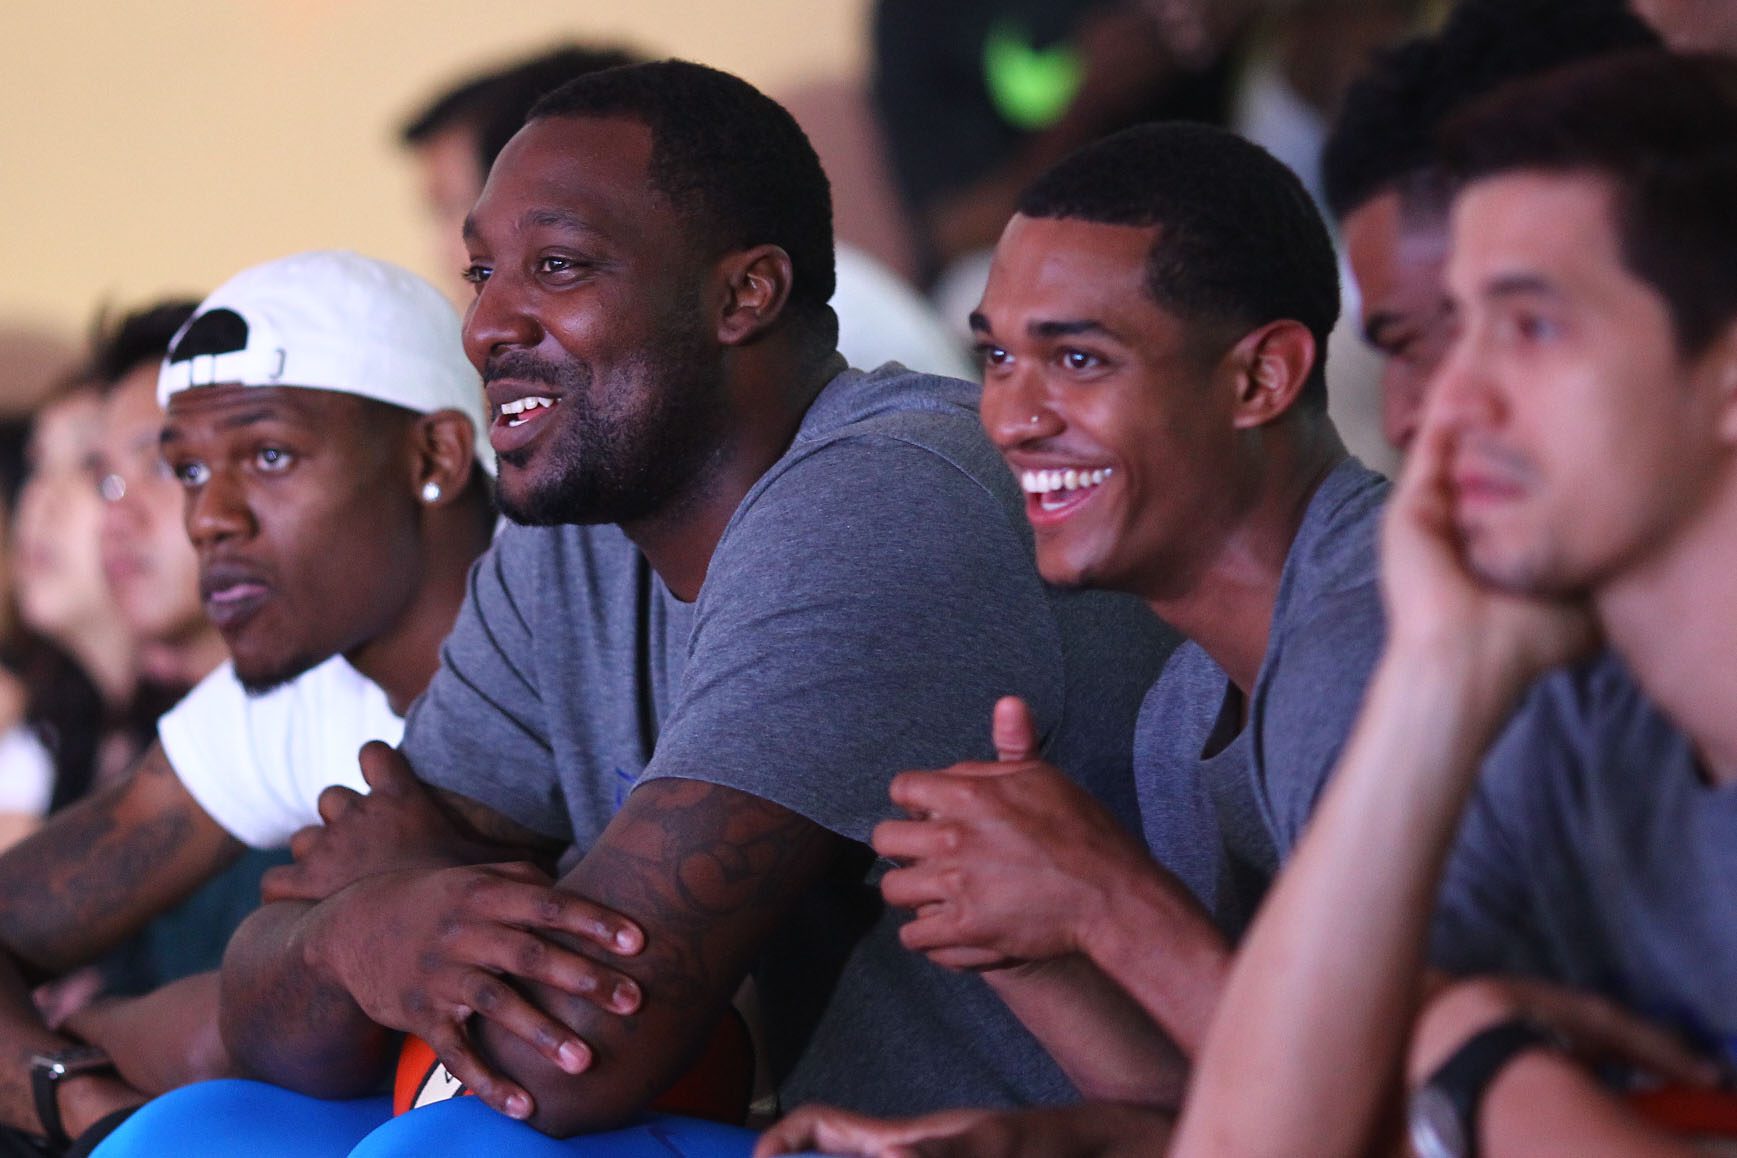 LOOK: Blatche is back, joins Gilas during Nike unveiling